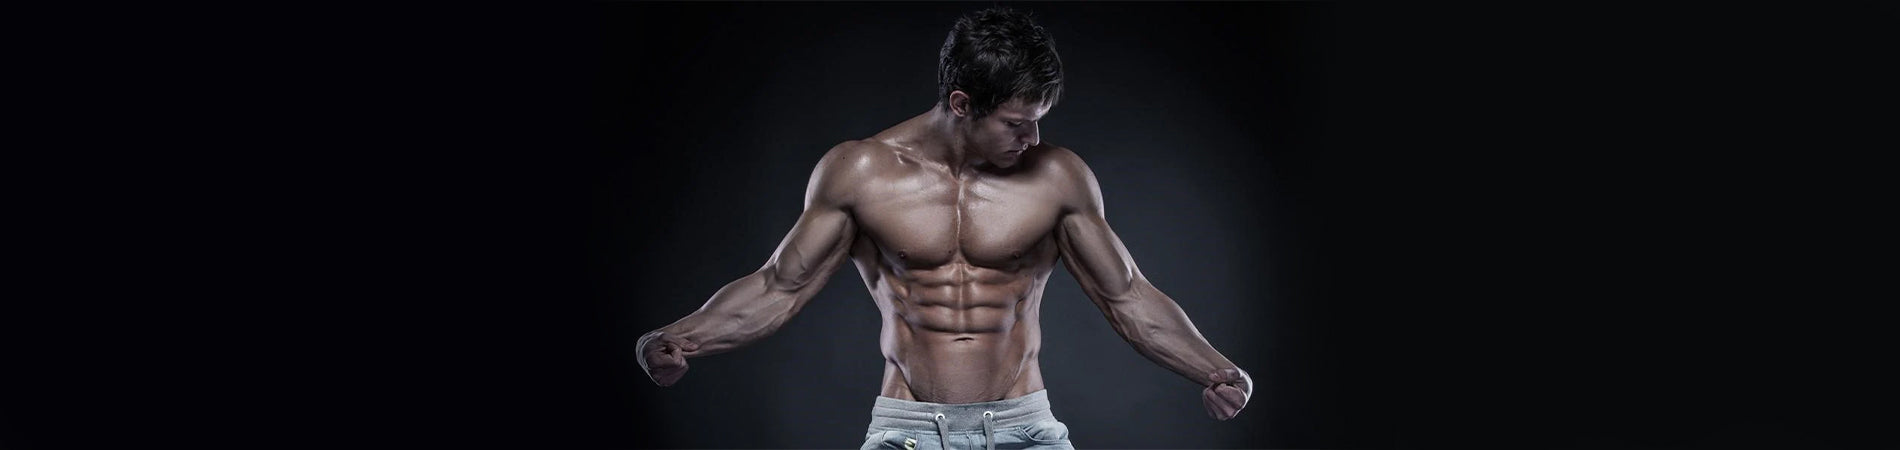 Best Beginner Ab Workout: How To Build Abs of Steel